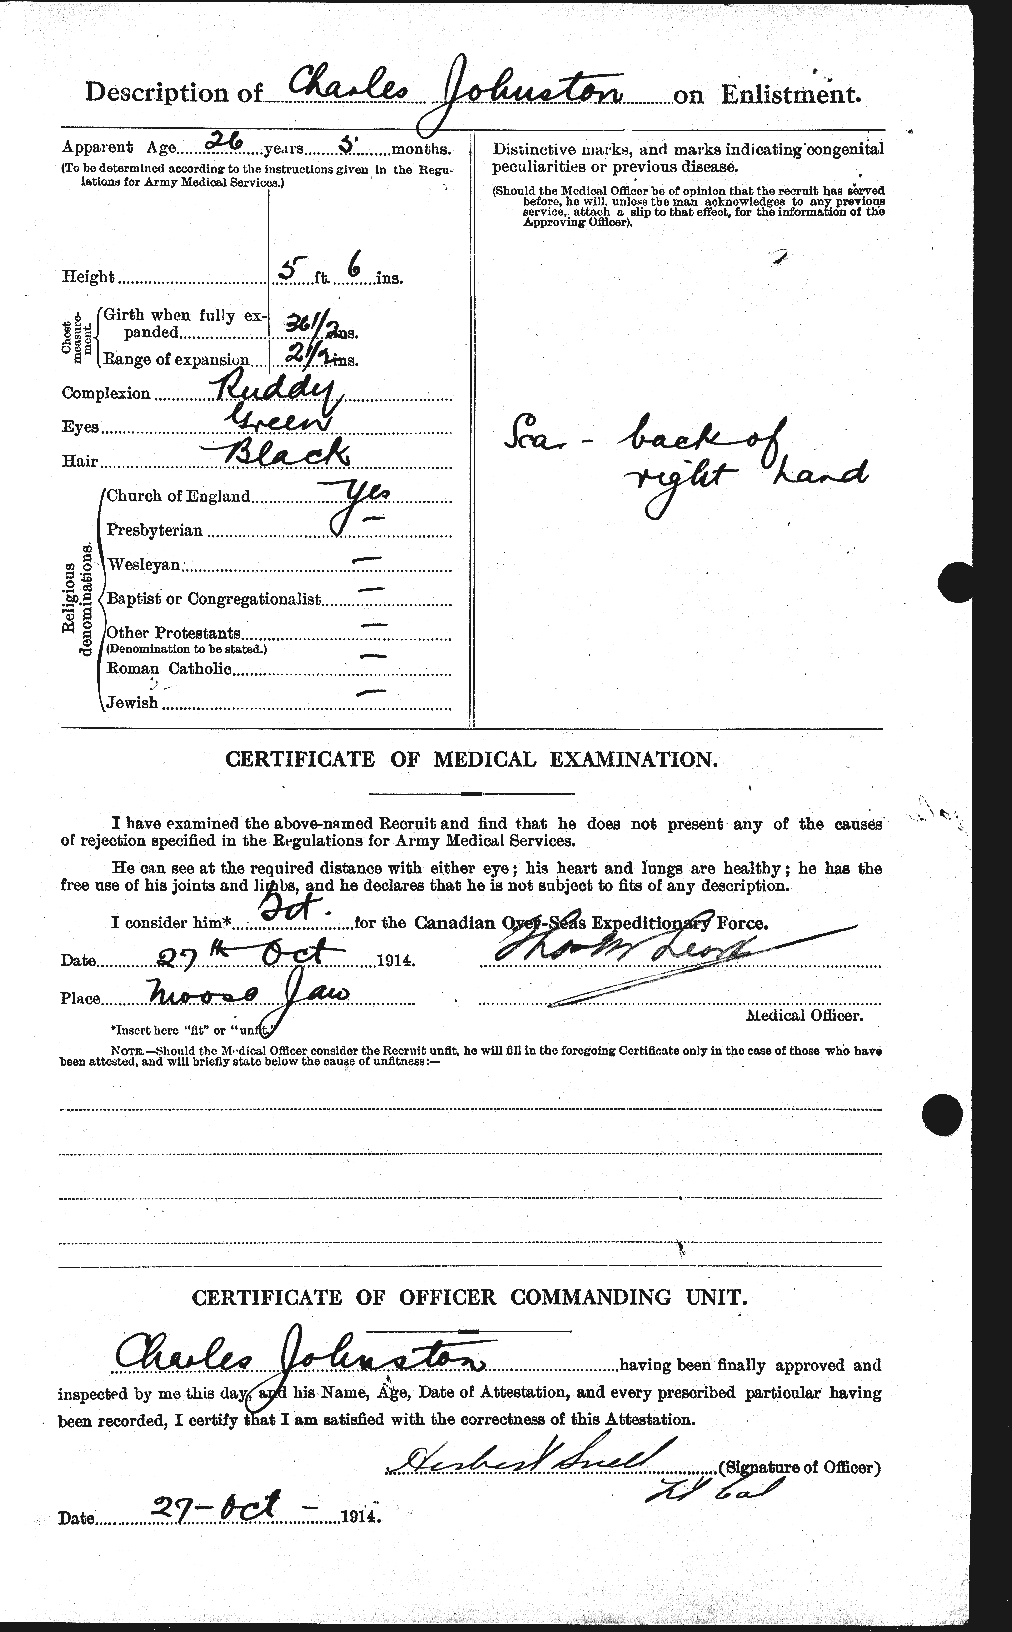 Personnel Records of the First World War - CEF 423088b